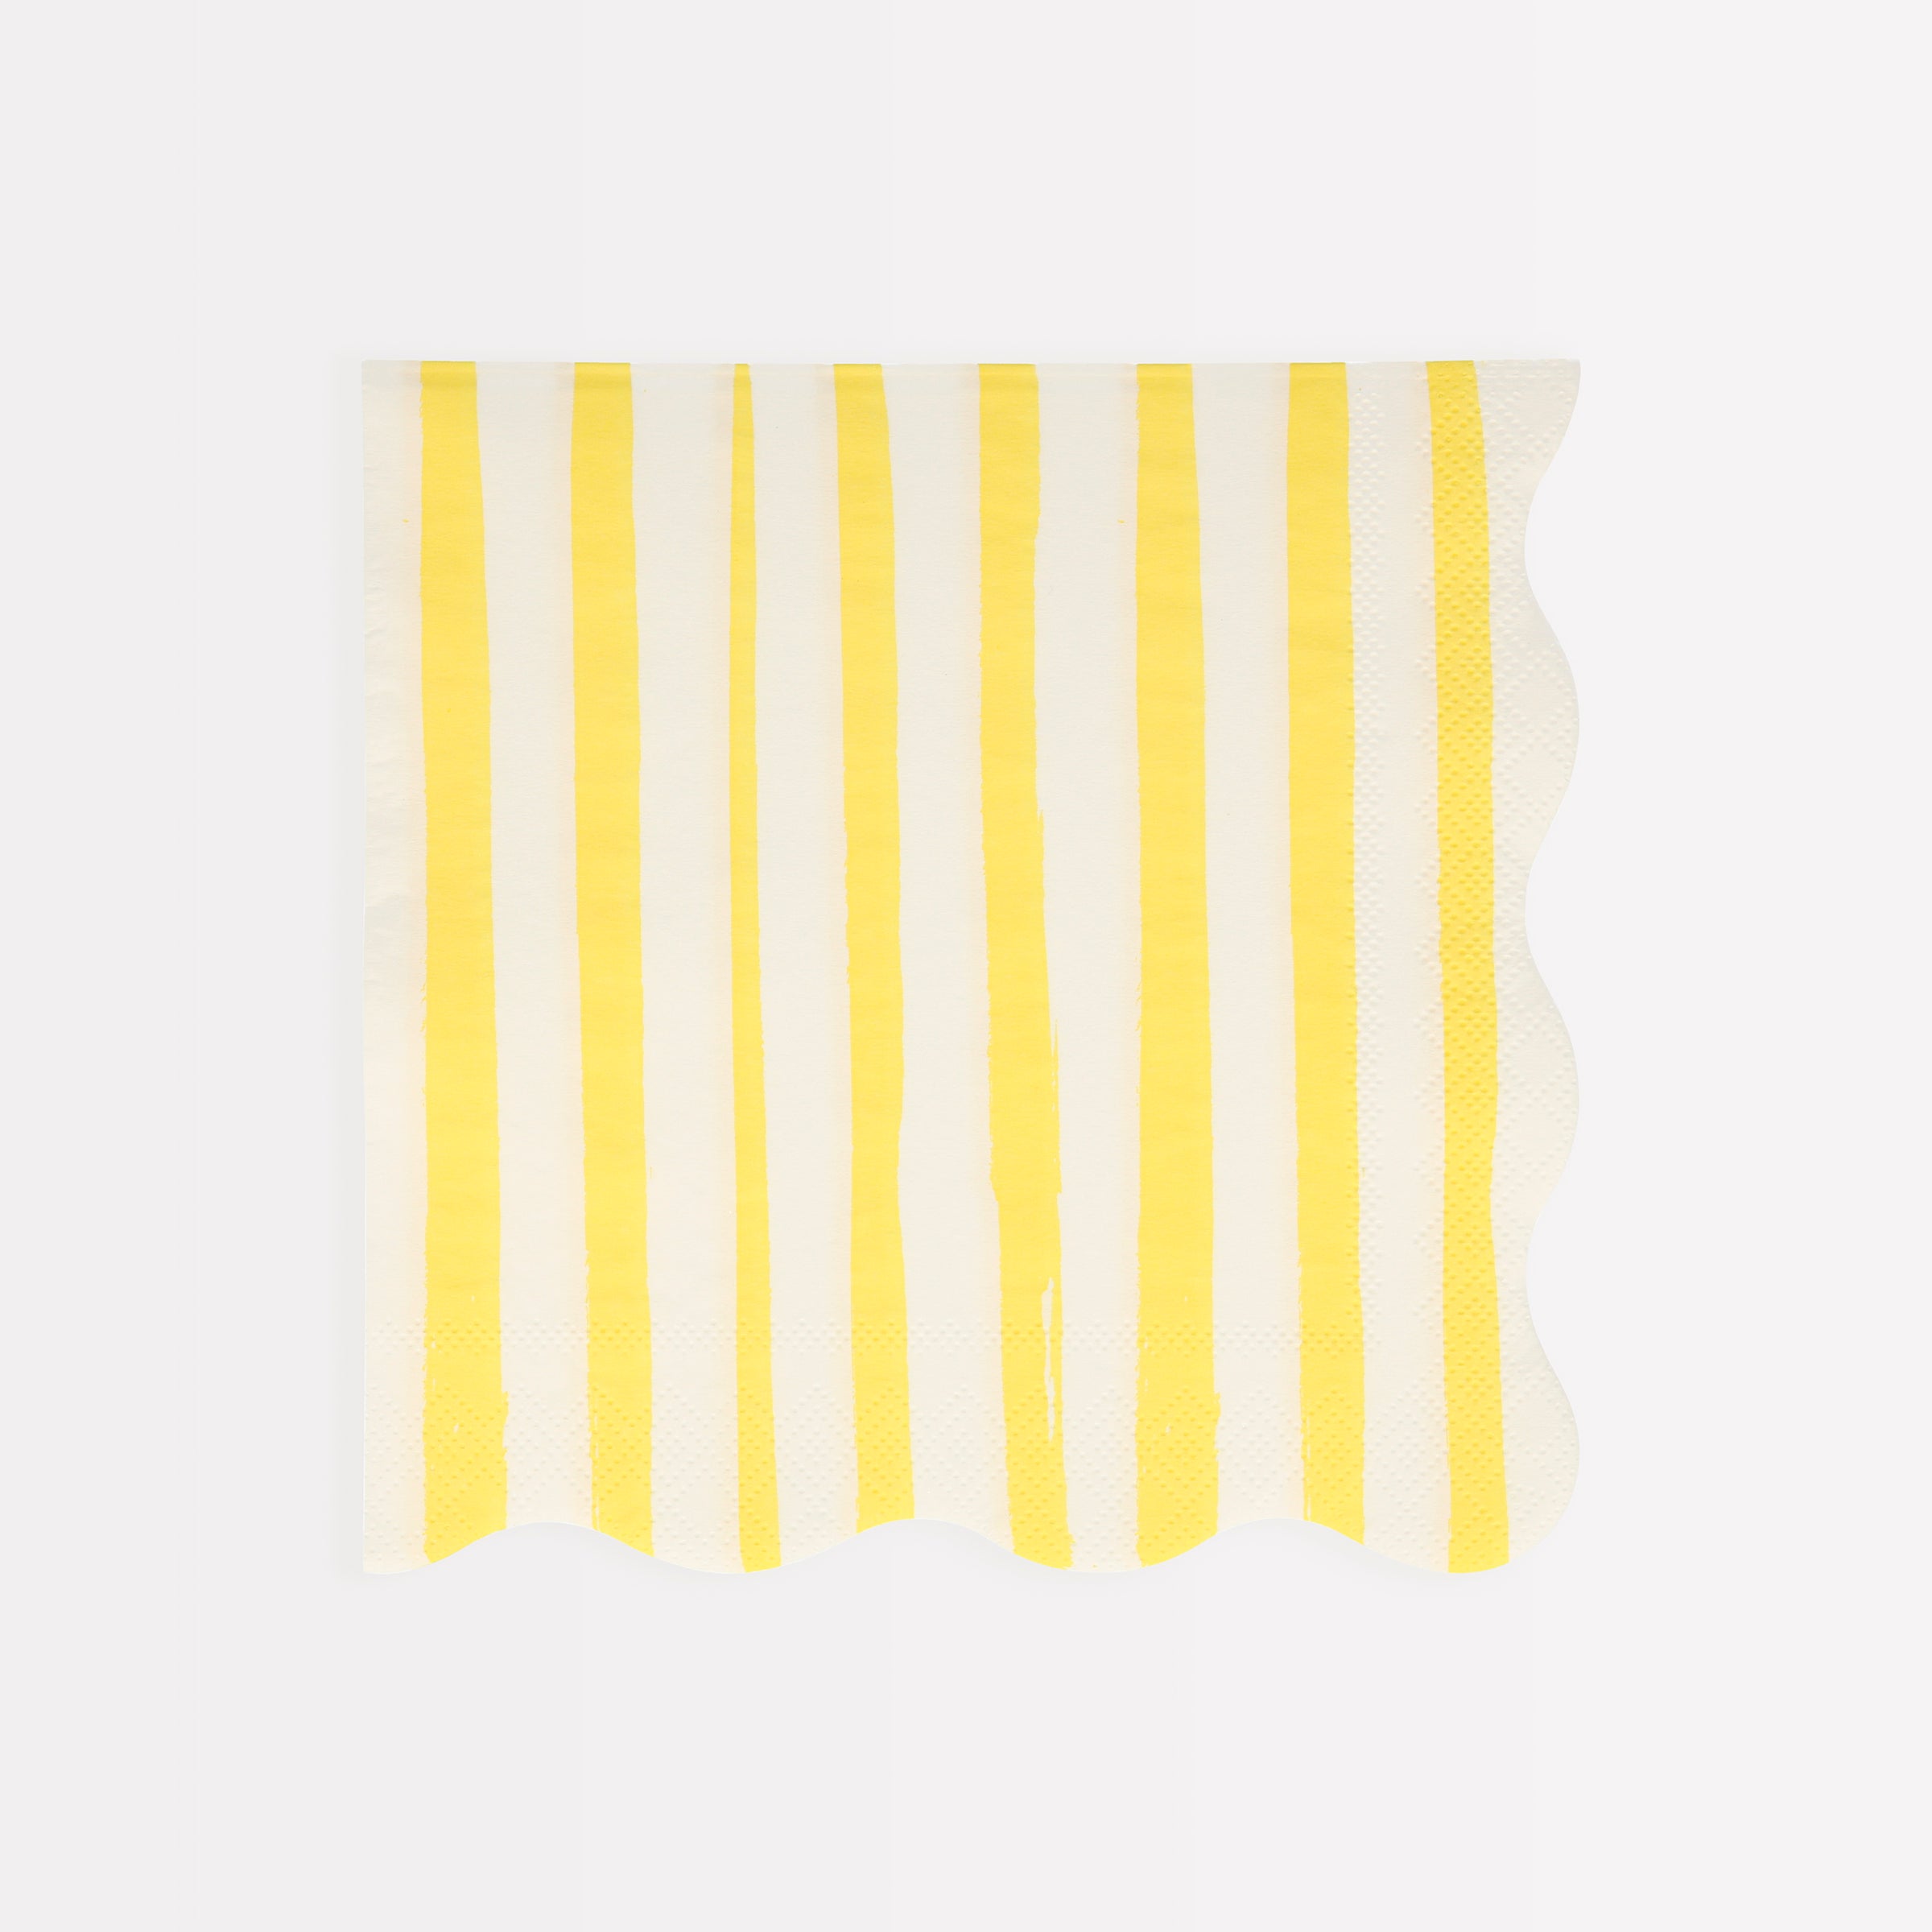 Our paper napkins, crafted with bright yellow stripes, are ideal to add to your birthday party supplies.